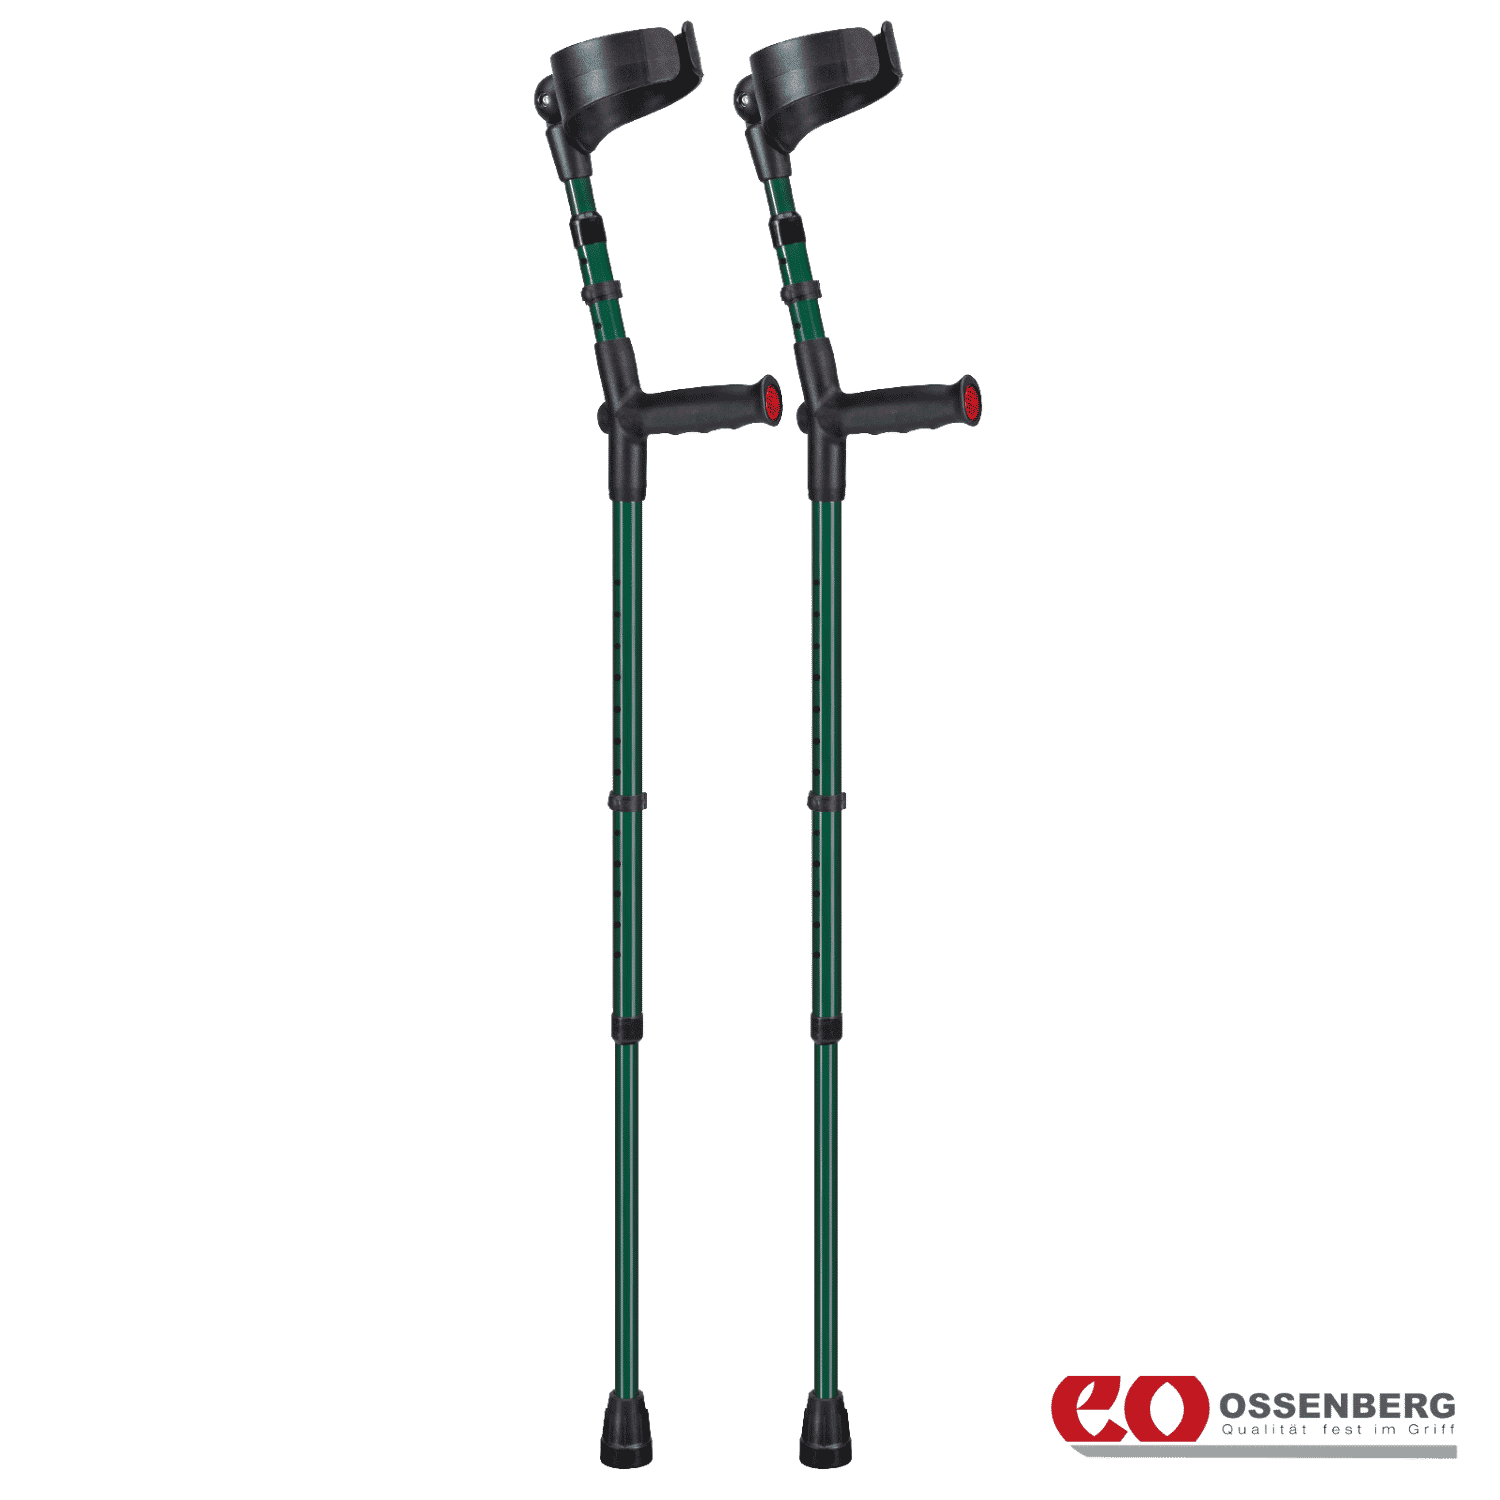 View Ossenberg Soft Grip Double Adjustable Crutches British Racing Green Pair information